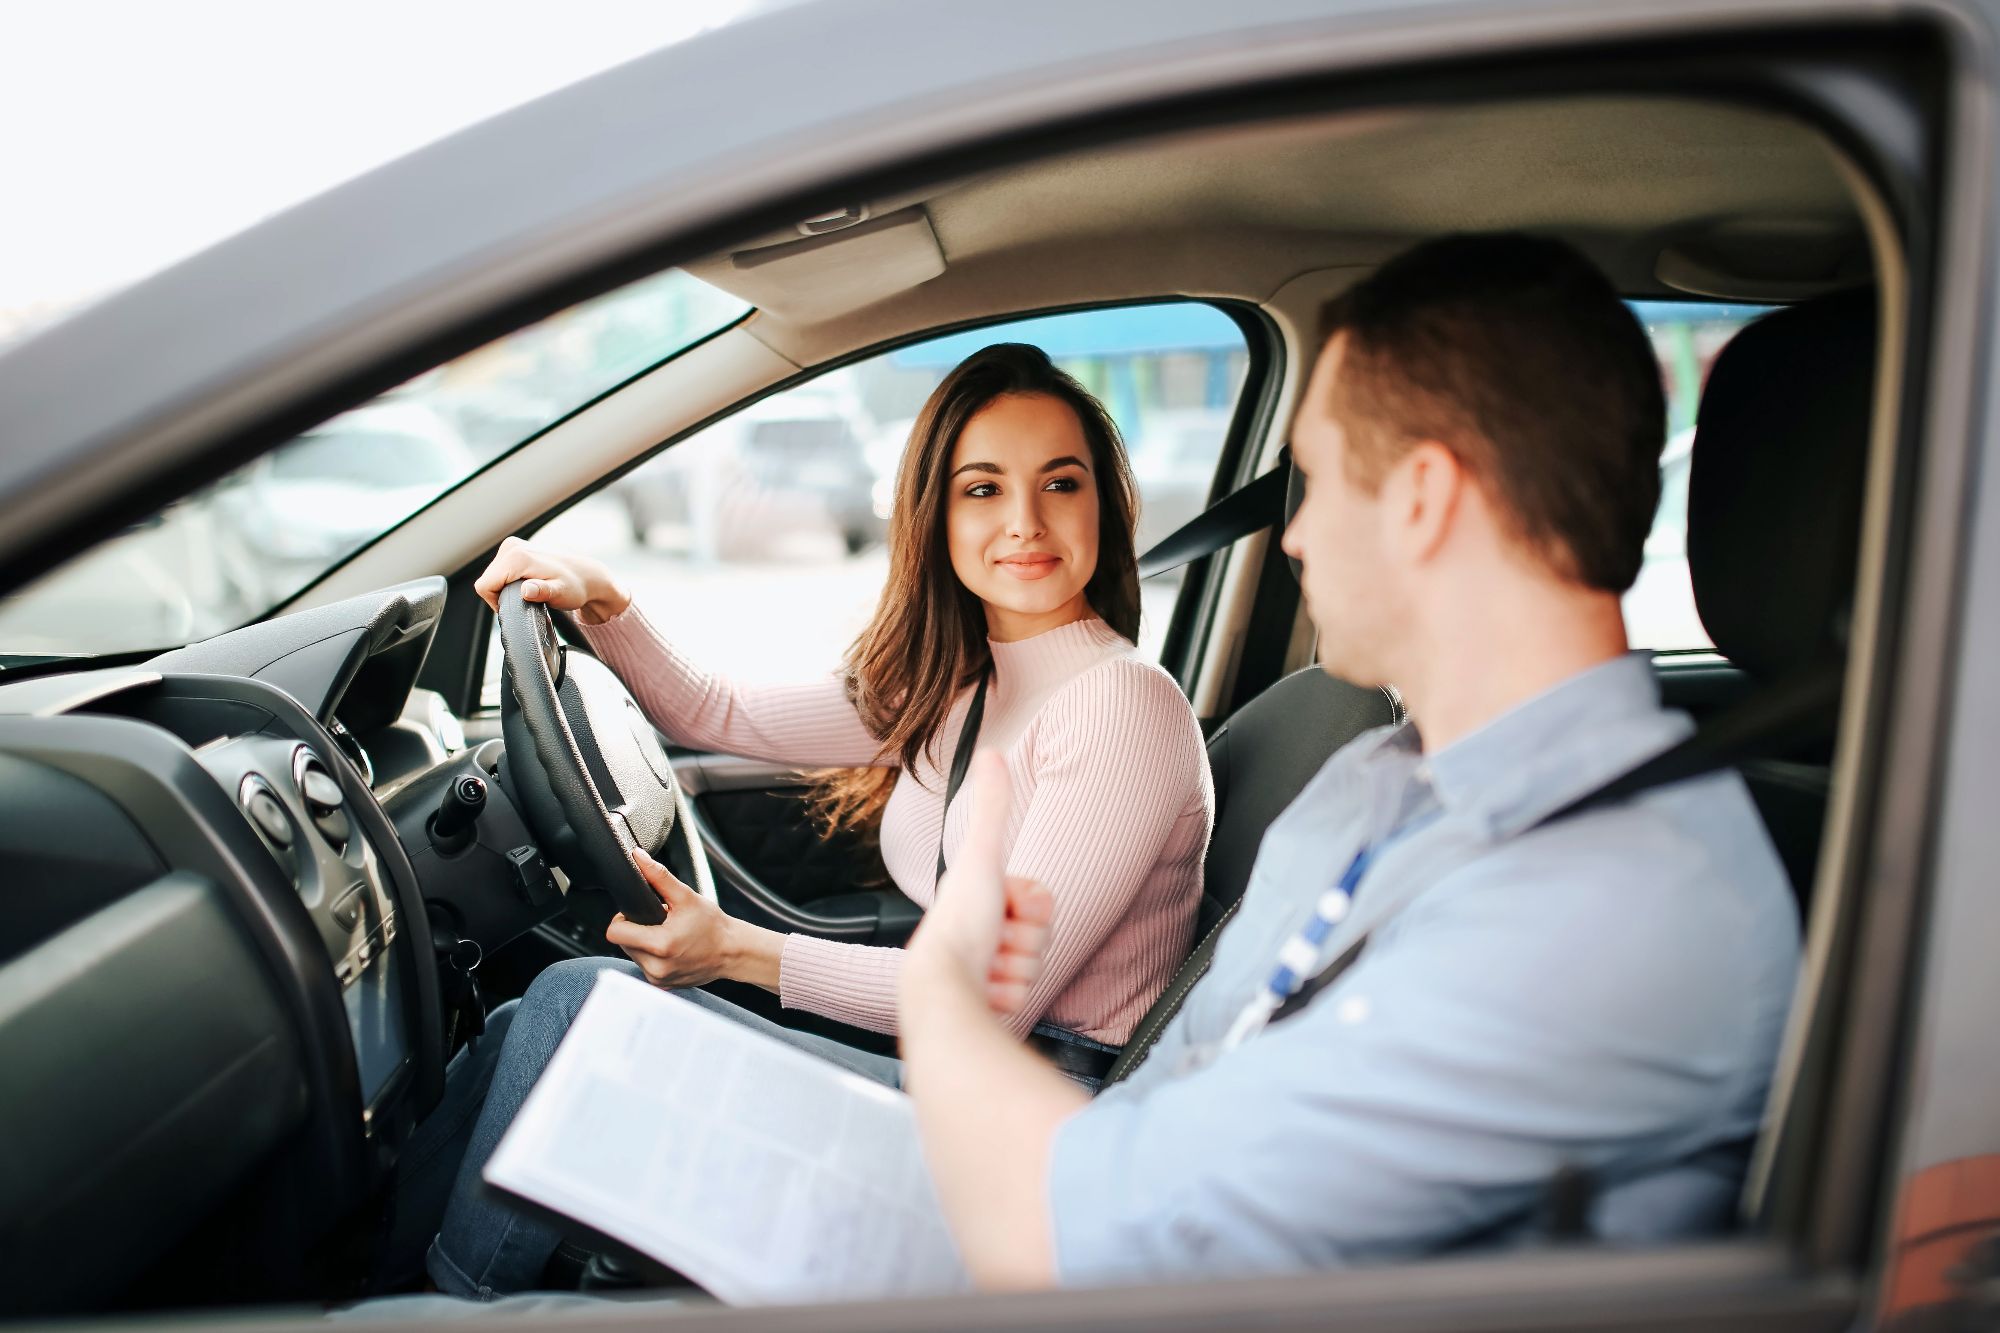 Understanding Minor Faults on a Driving Test  When facing a driving test, distinguishing between minor and major faults is crucial, as the differences for passing or failing can be significant.  While some cases are straightforward, the examiner's discretion in determining the severity of a mistake plays a pivotal role.